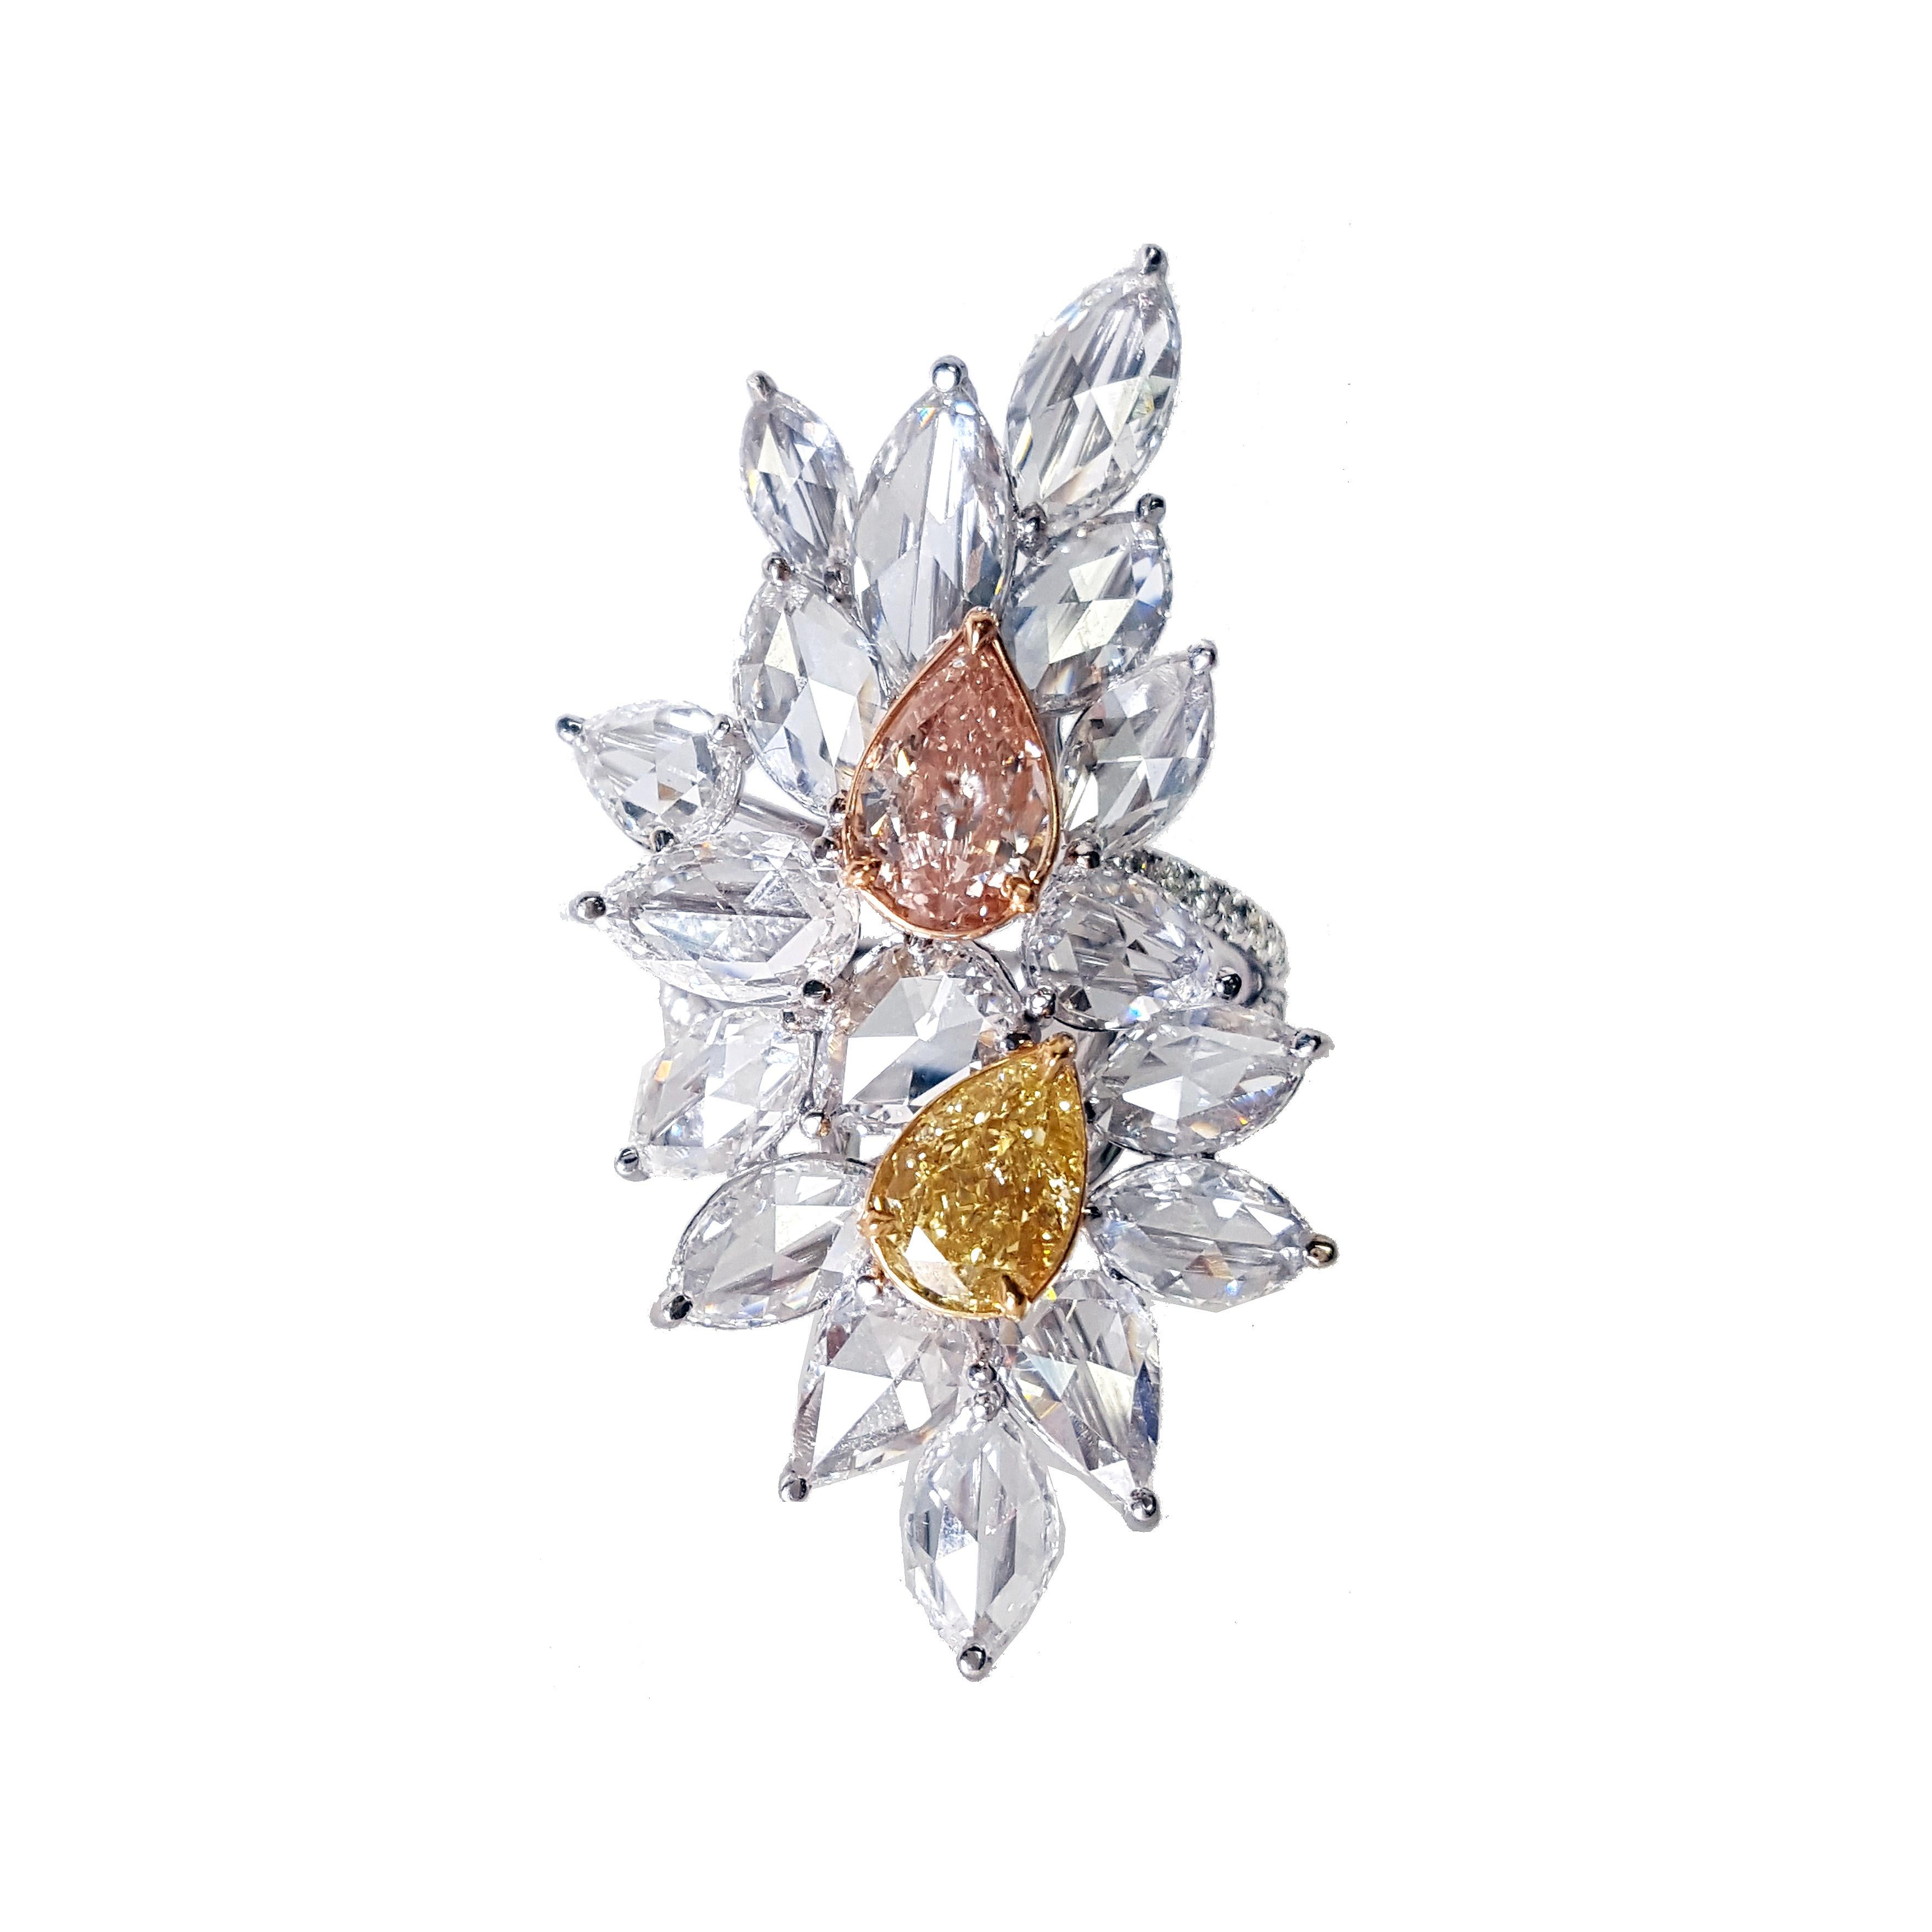 Pear Cut 9.54 Carat Yellow, Pink Diamond and Rose-Cut diamond Cluster Ring GIA Certs. For Sale